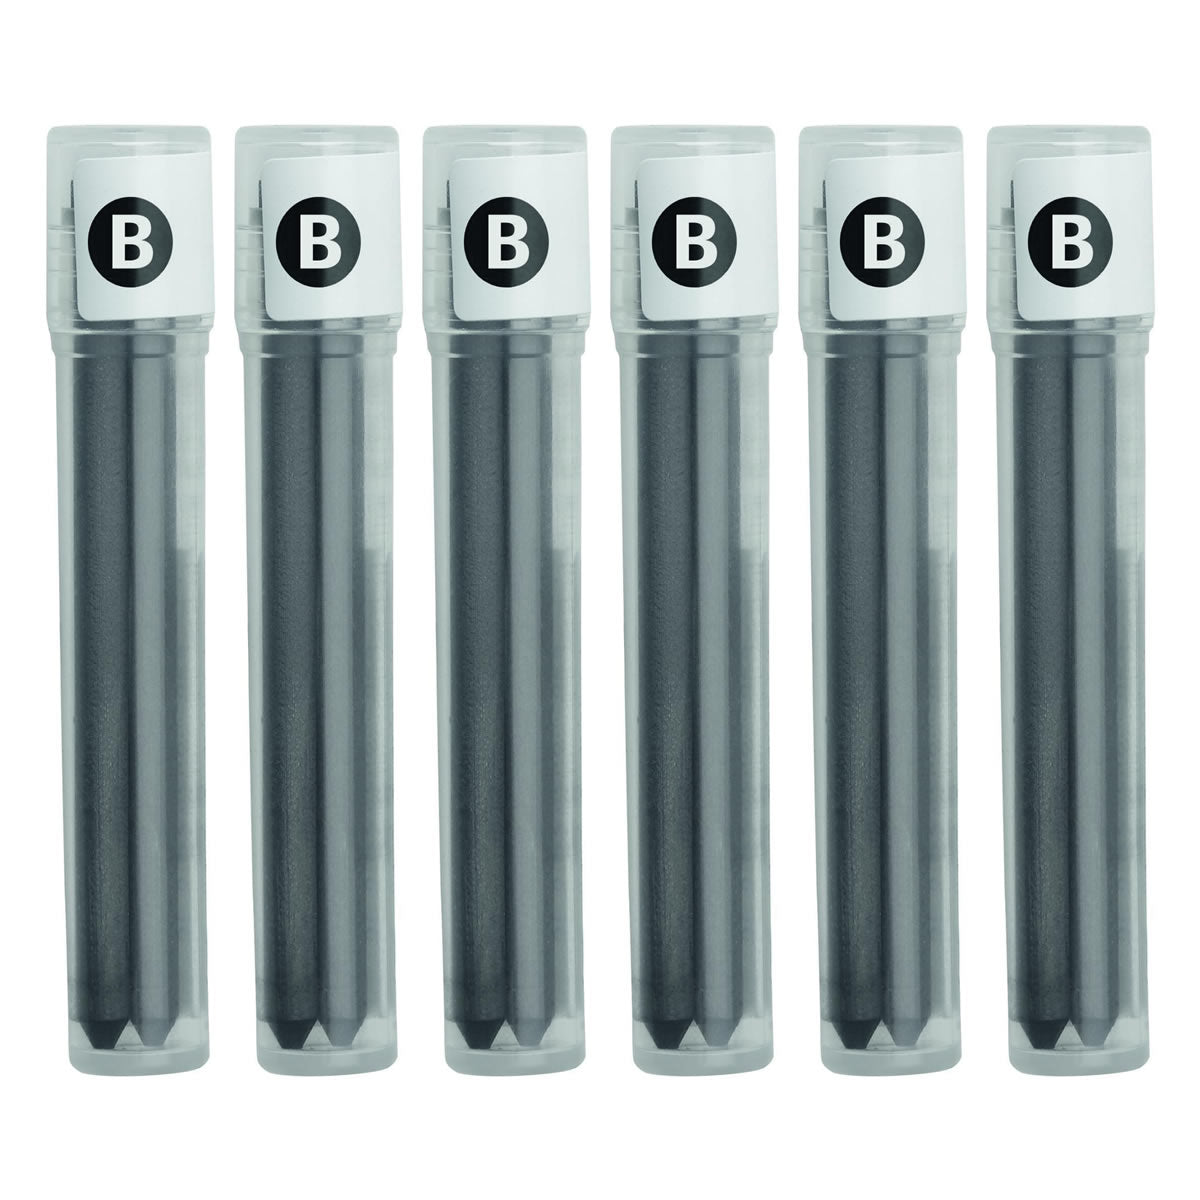 Pilot Croquis B Refill Leads (Pack of 6)